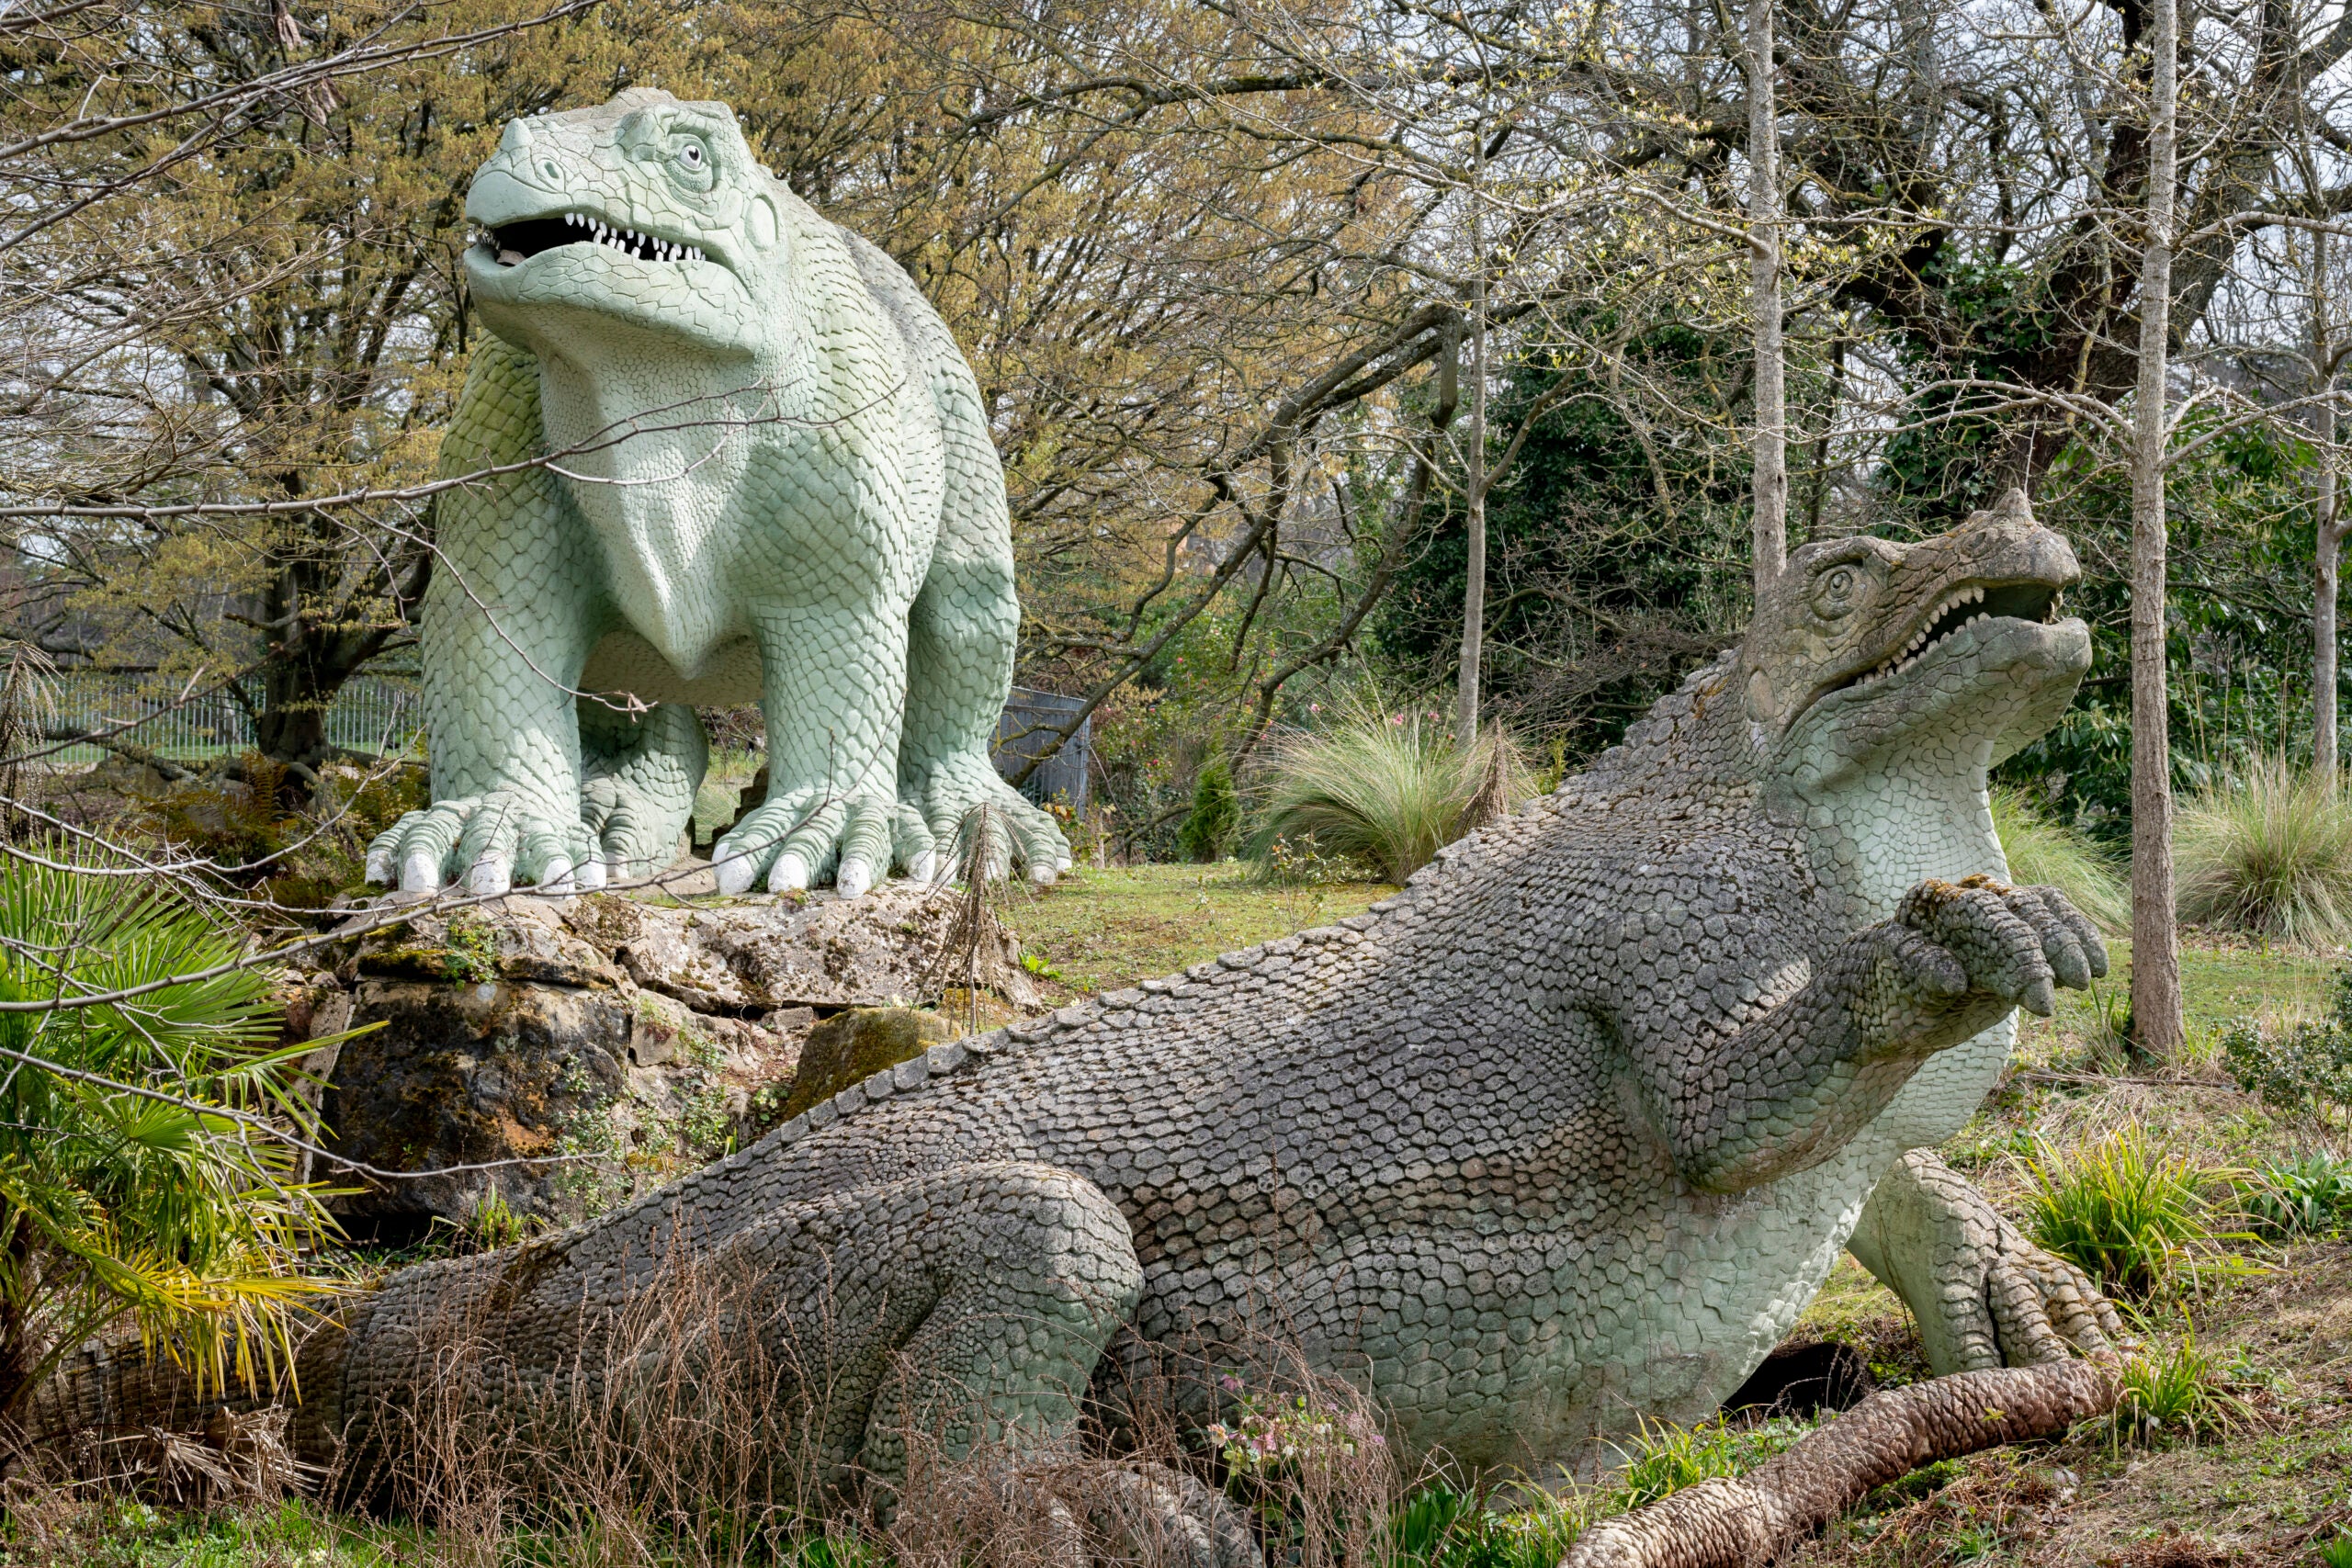 Two of the Crystal Palace dinosaurs